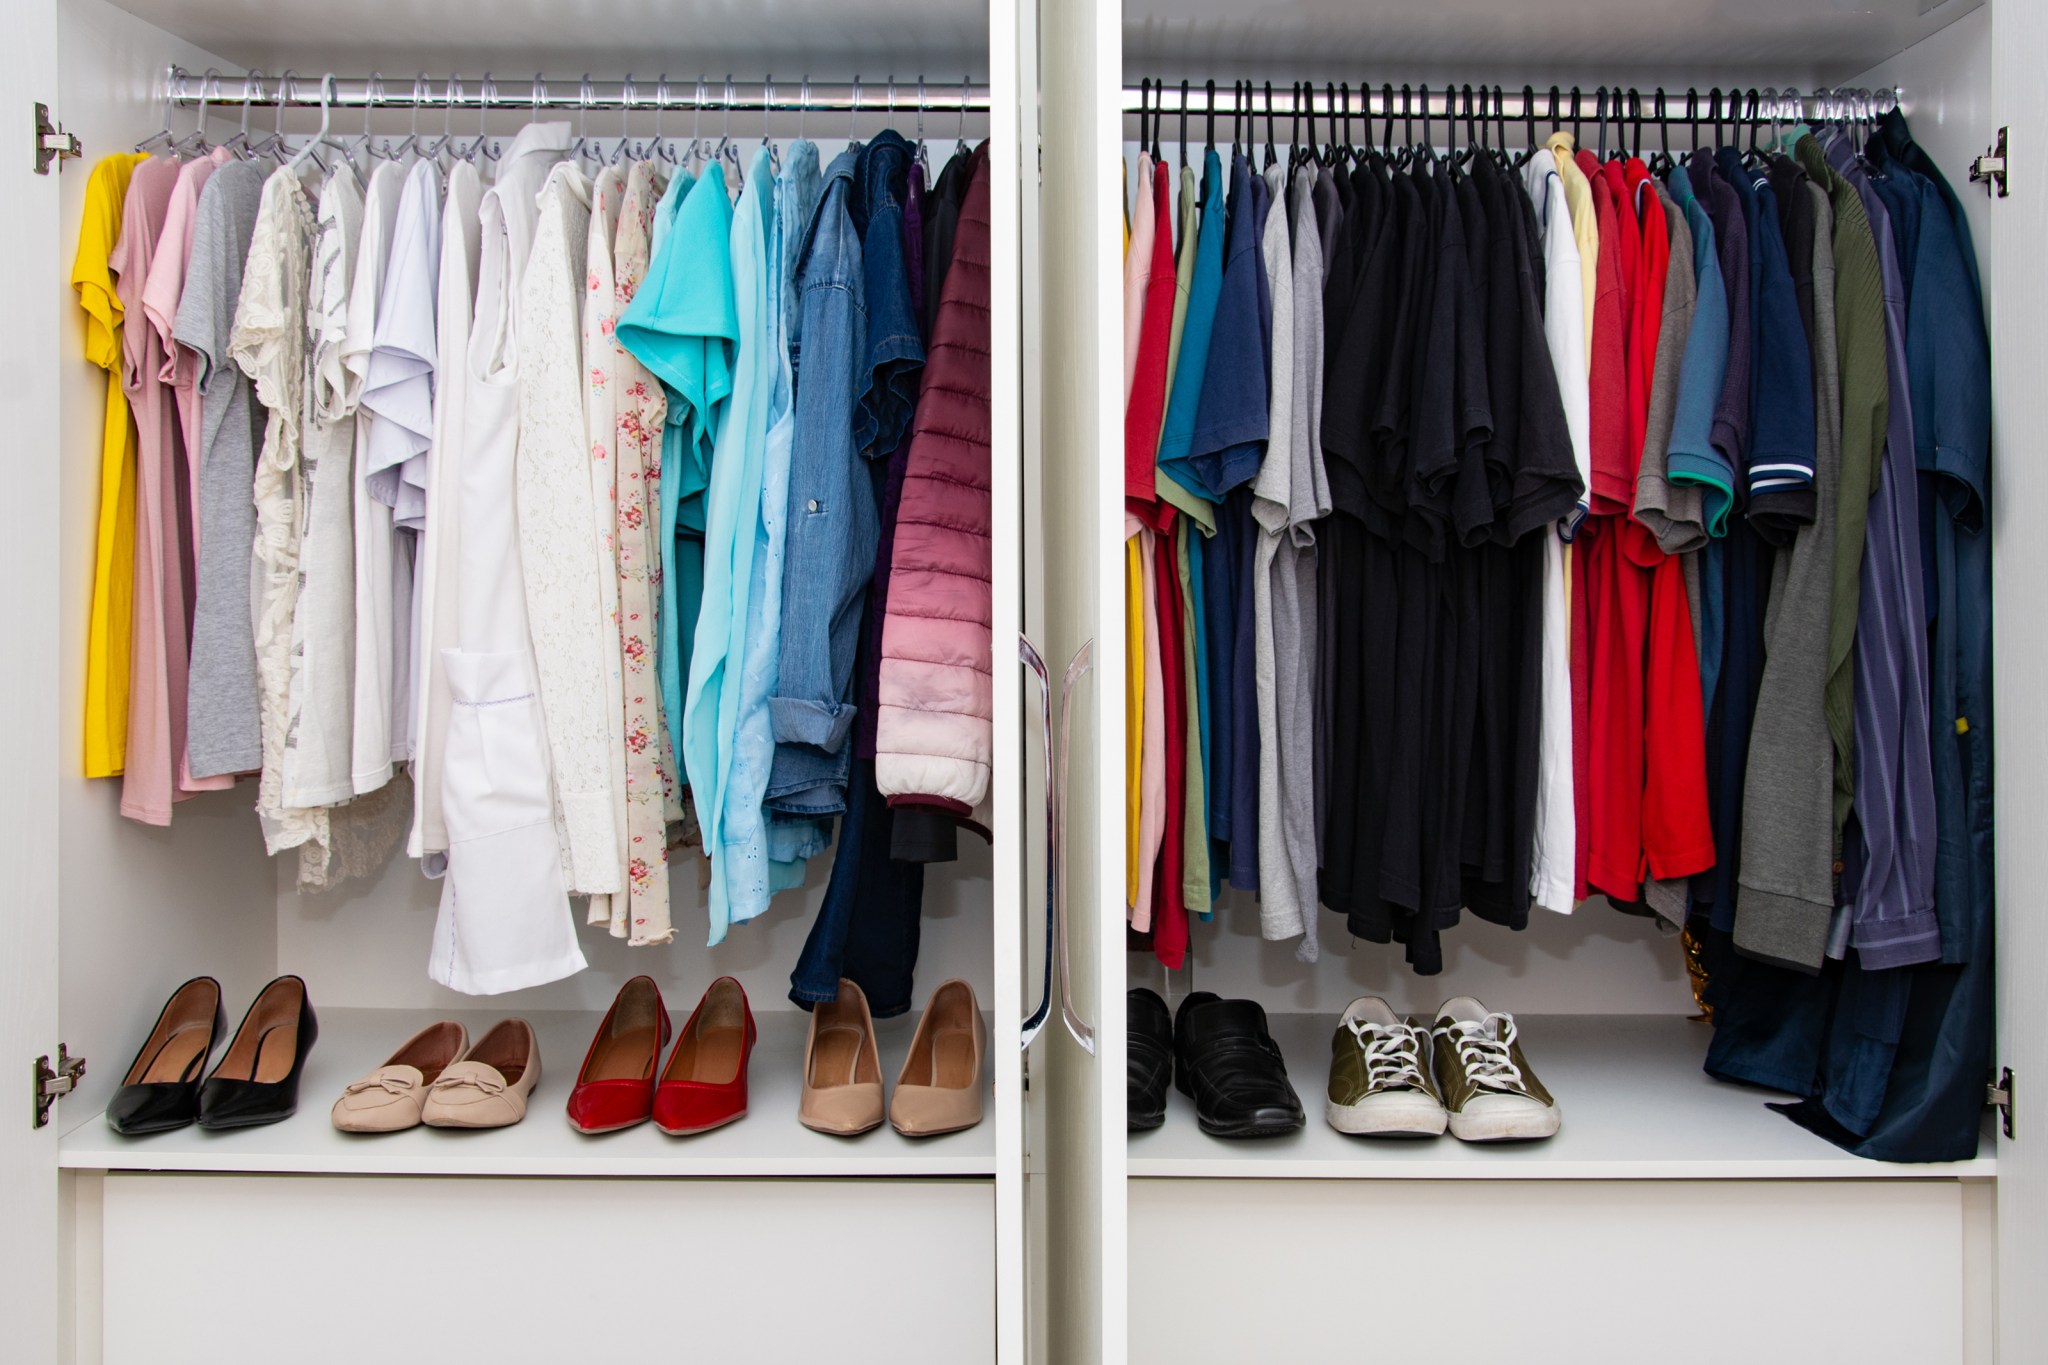 Maximizing a small reach-in closet where every inch counts